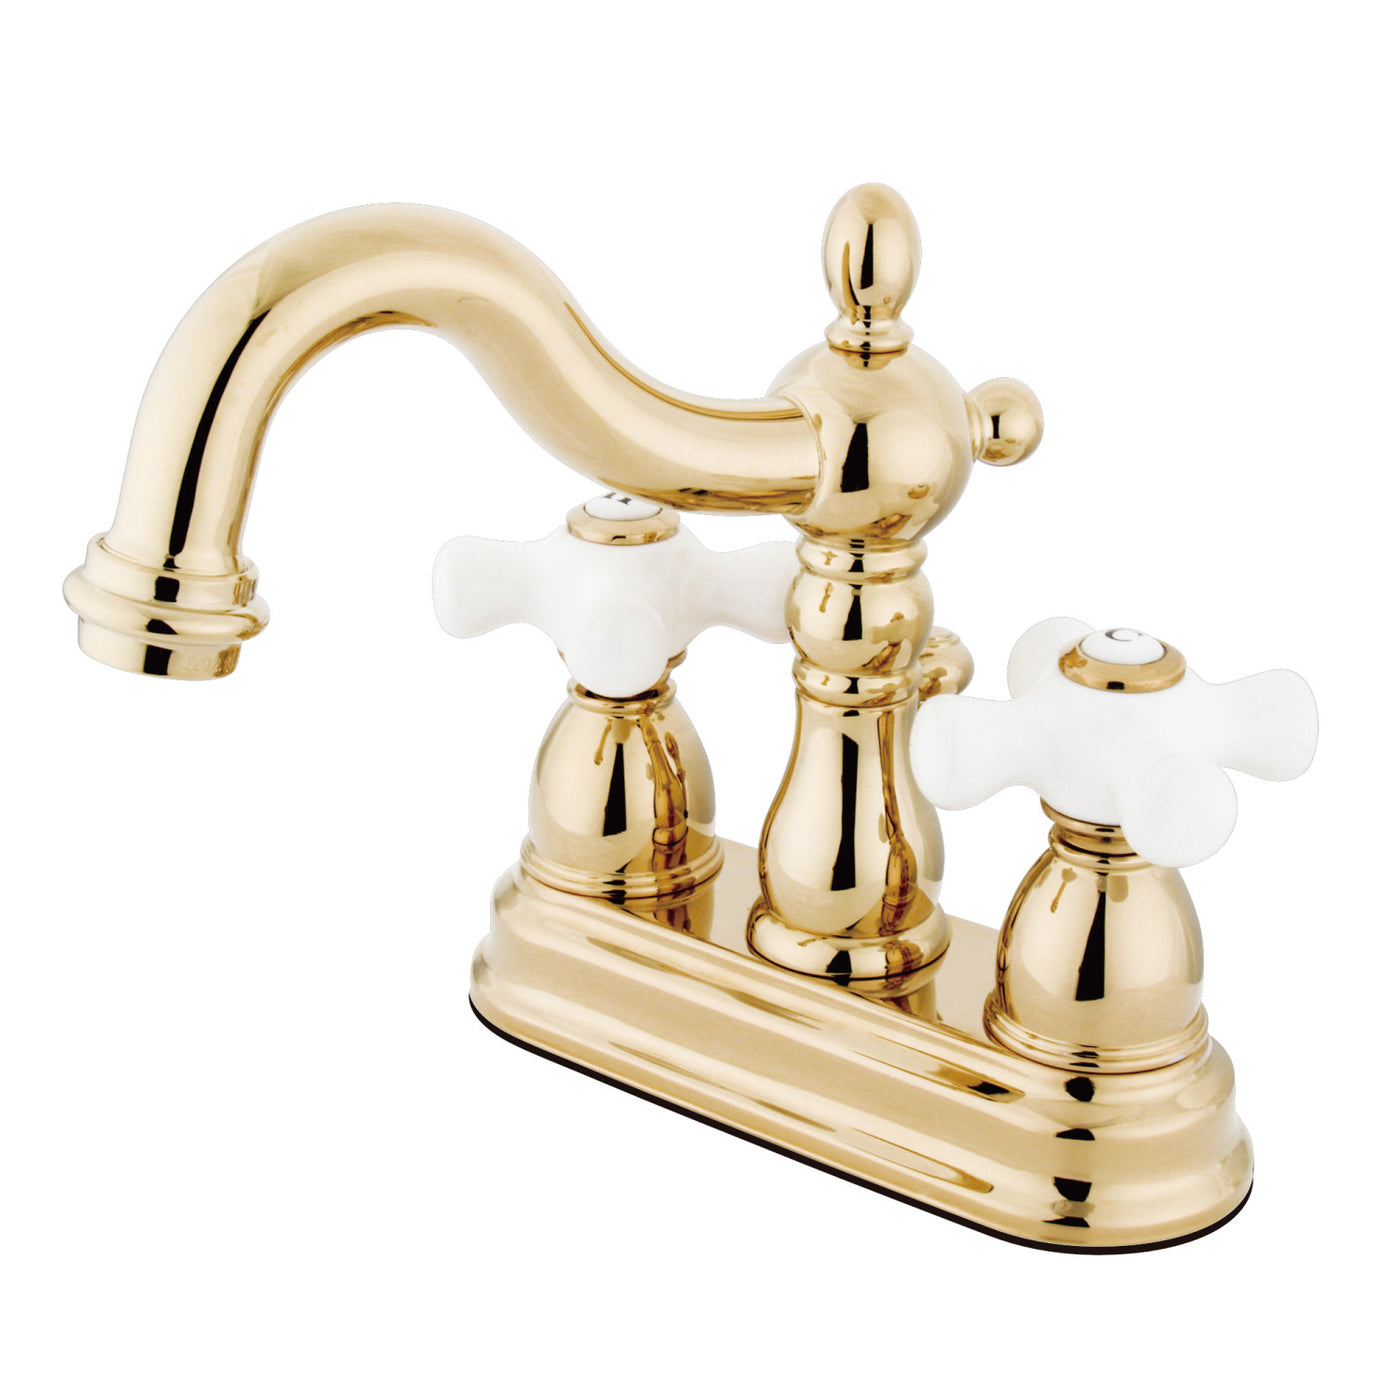 Elements of Design EB1602PX 4-Inch Centerset Bathroom Faucet with Plastic Pop-Up, Polished Brass